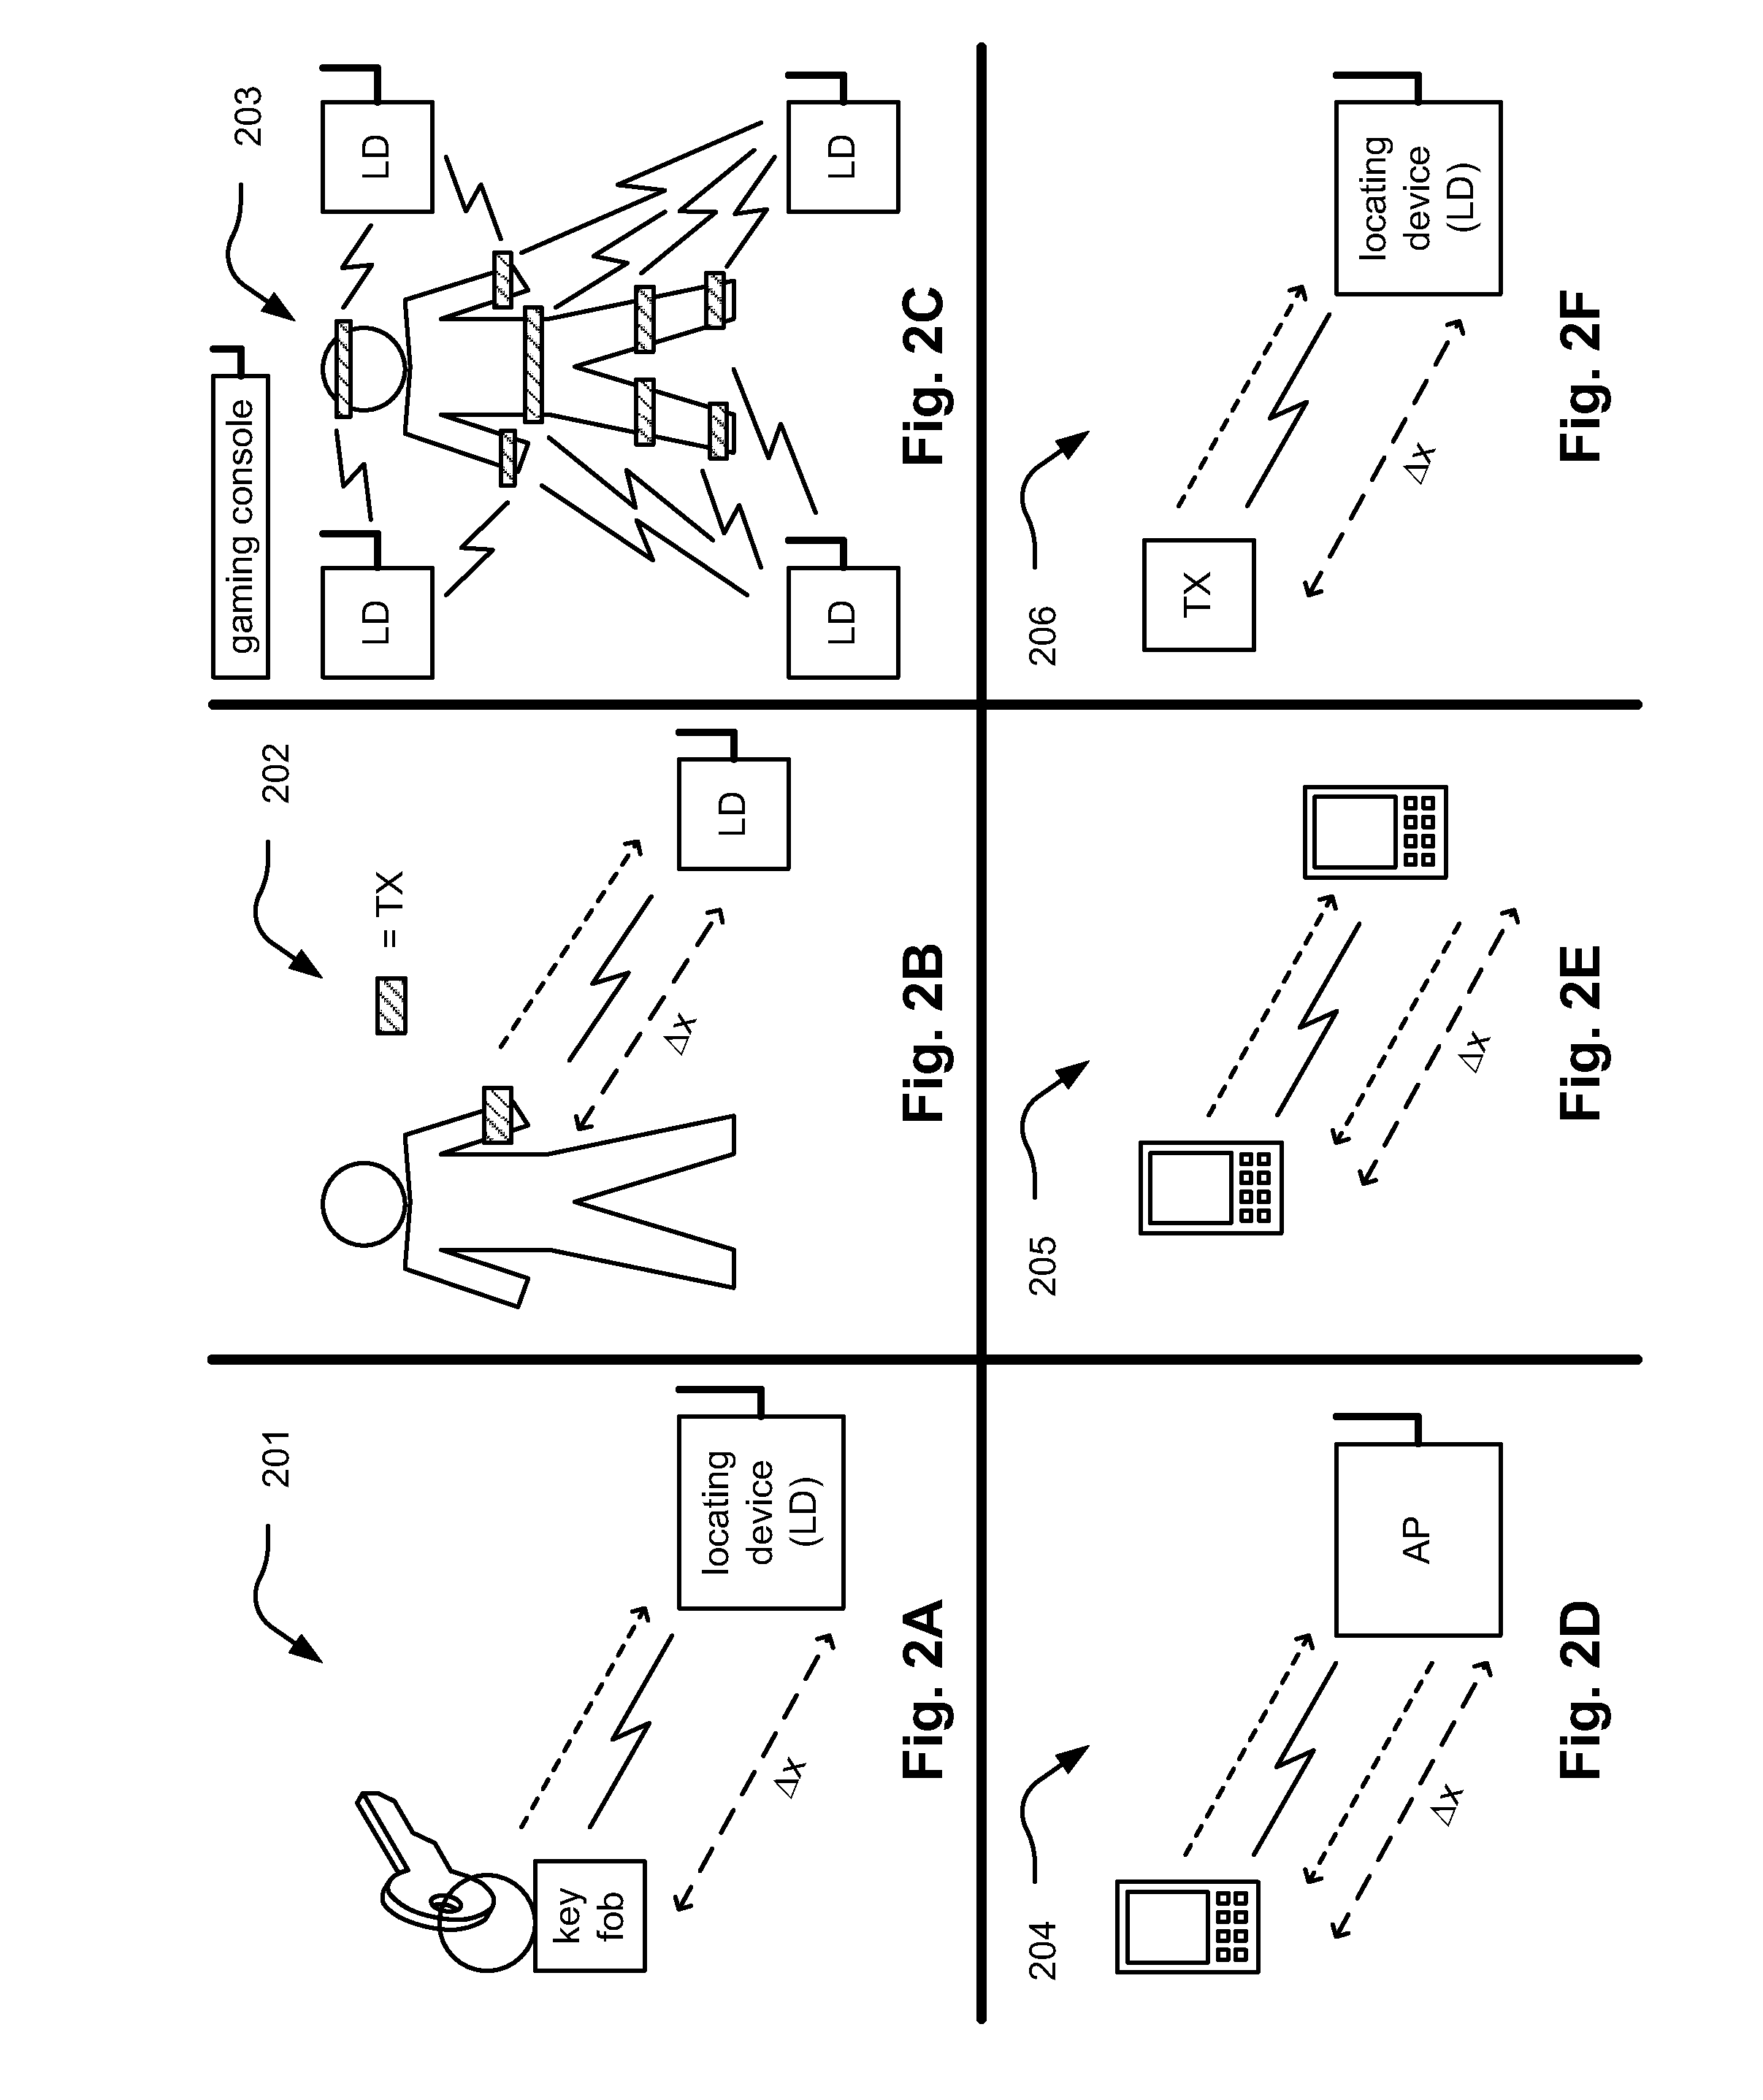 Angle of arrival and/or range estimation within a wireless communication device